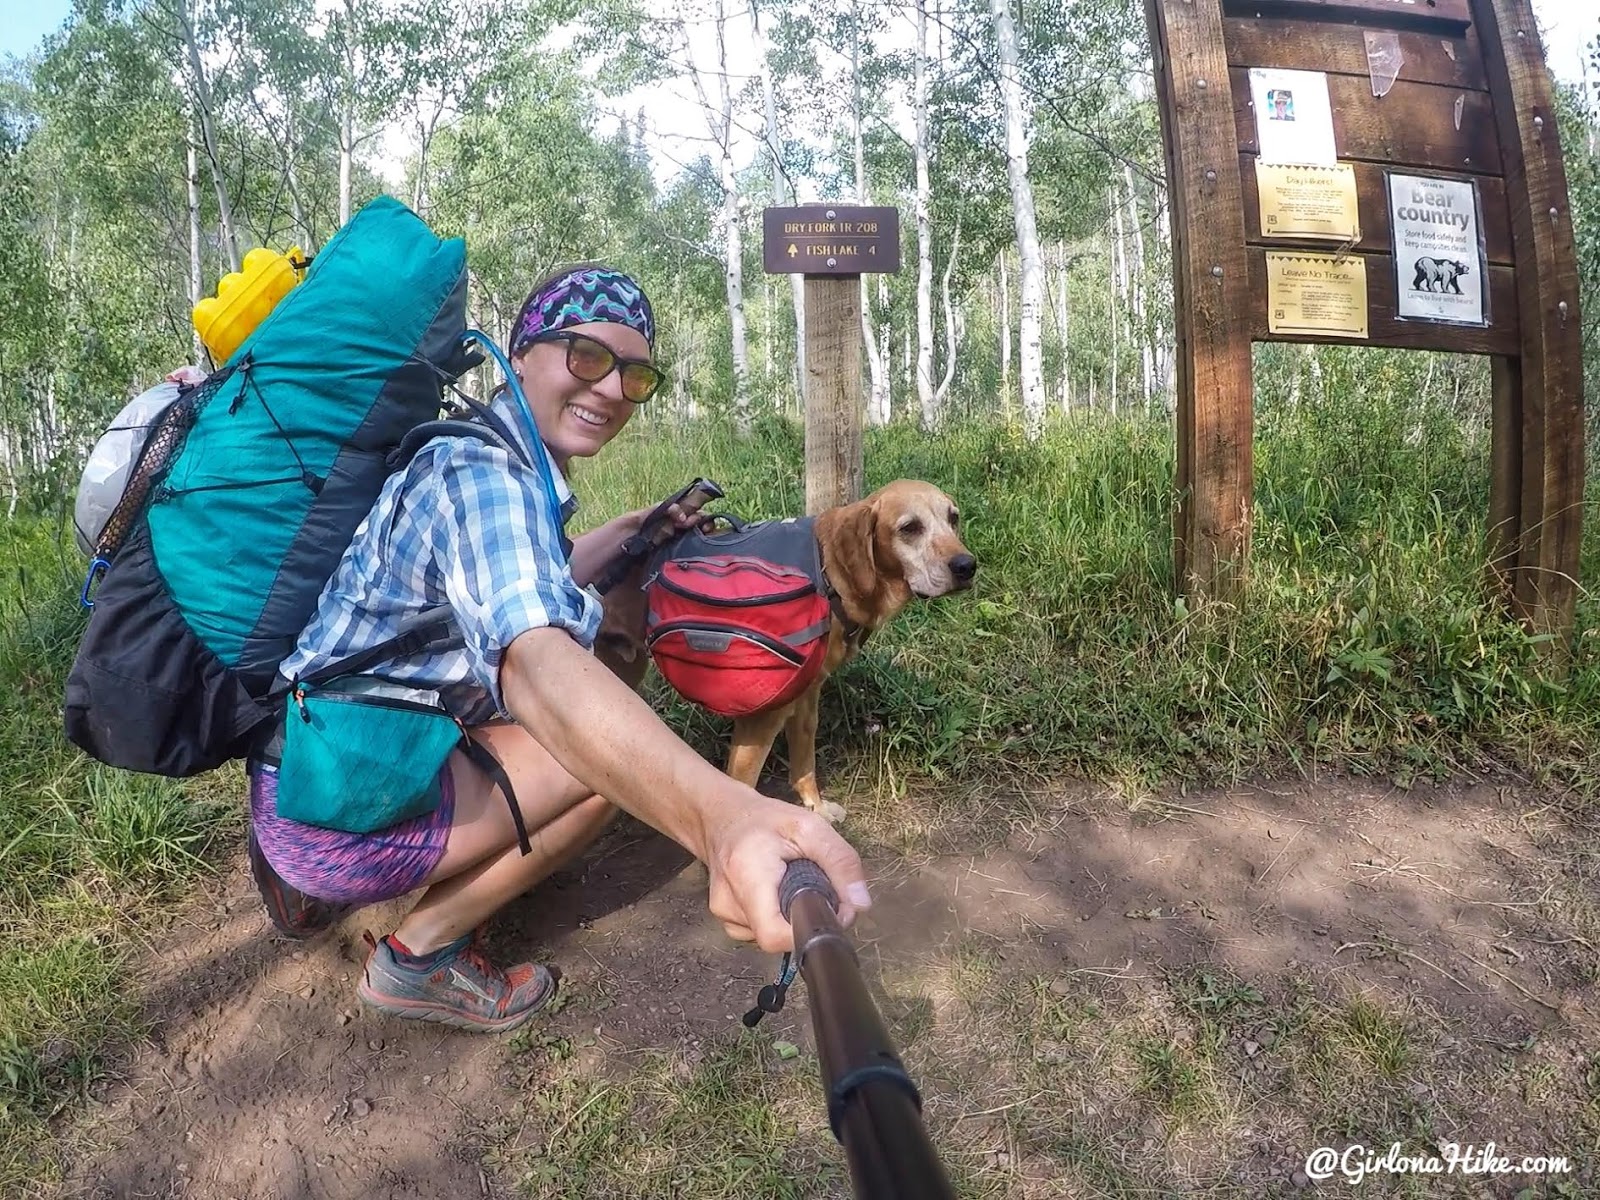 Backpacking to Round, Sand, & Fish Lakes, Uintas